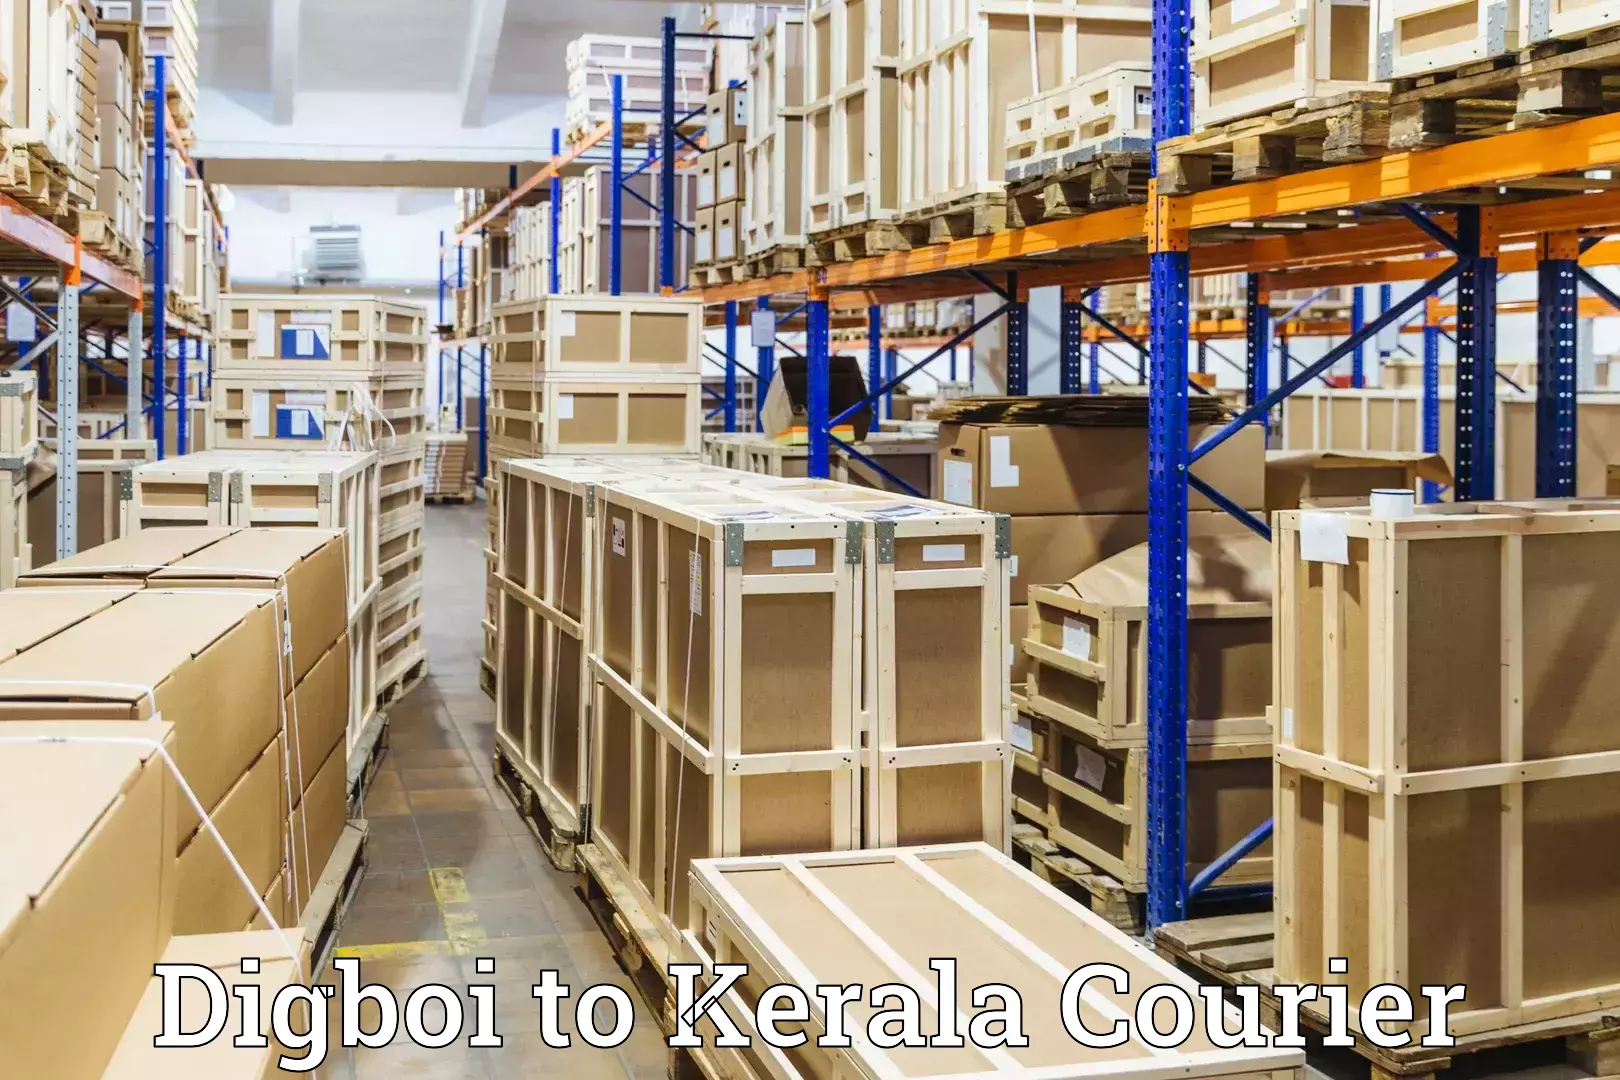 Luggage shipment specialists Digboi to Ottapalam